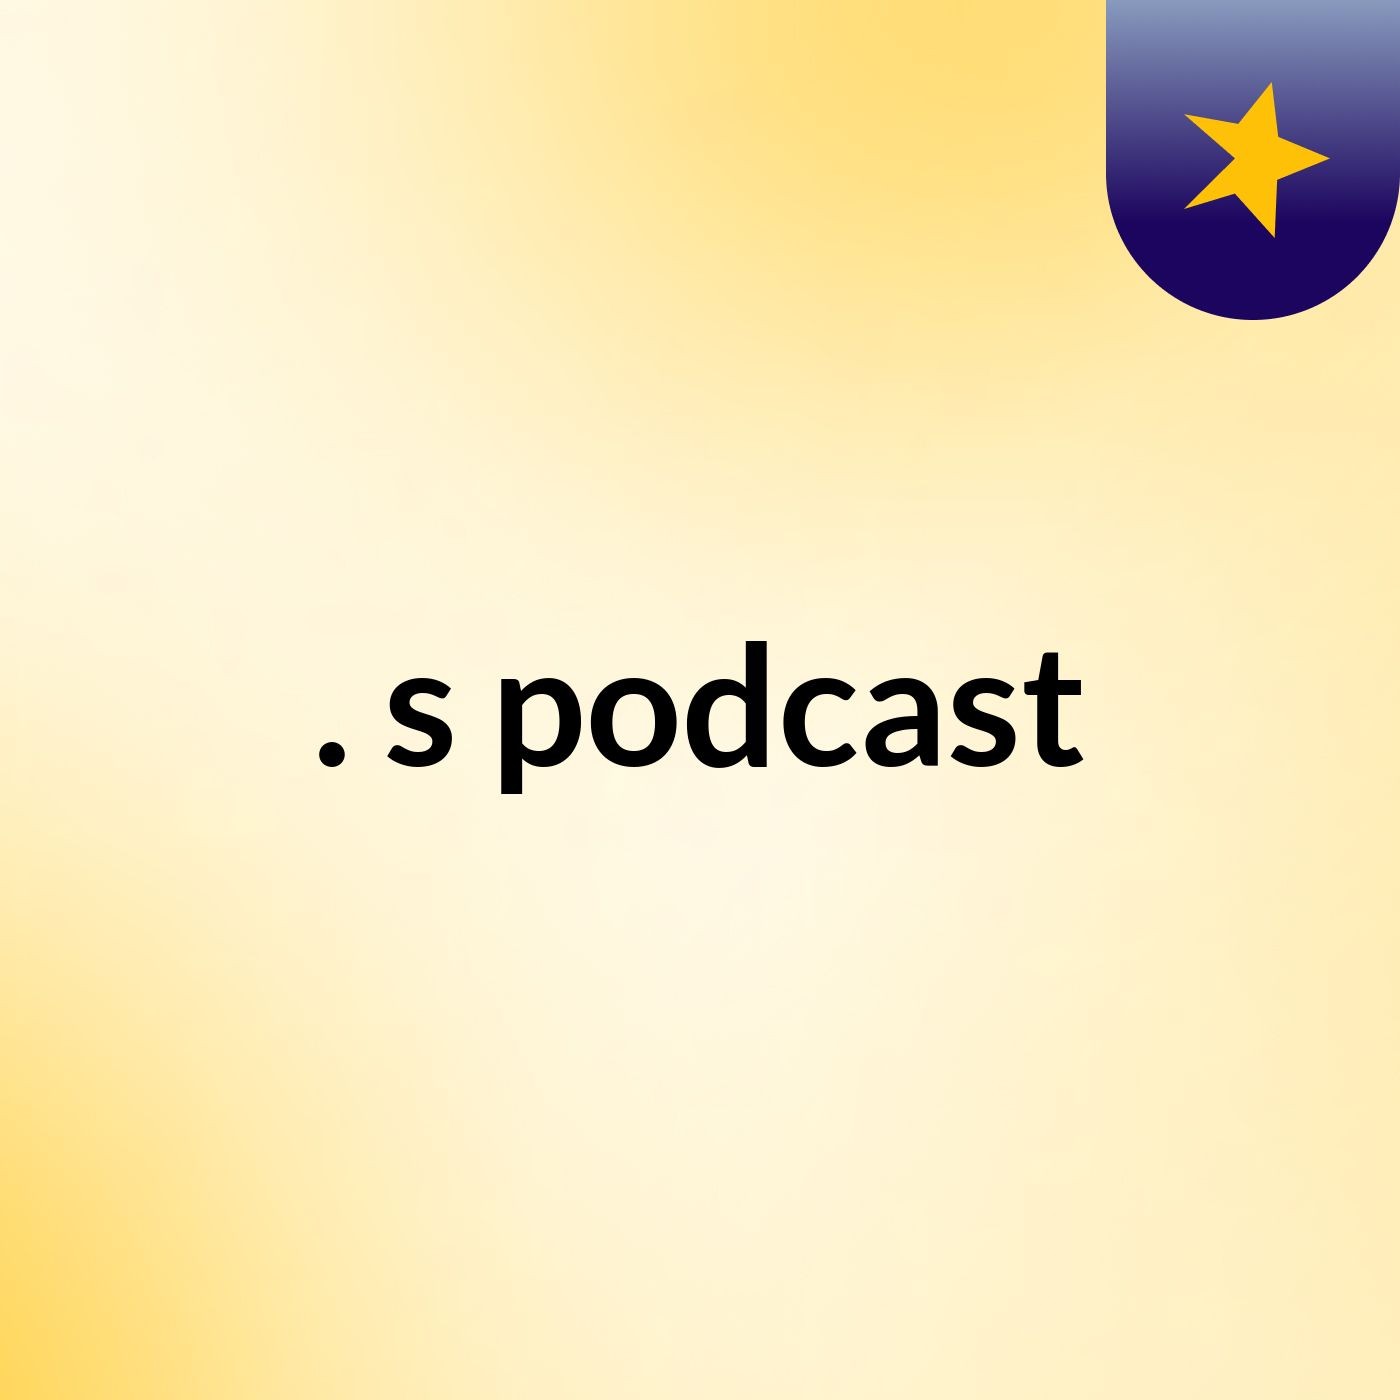 Episode 3 - .'s podcast